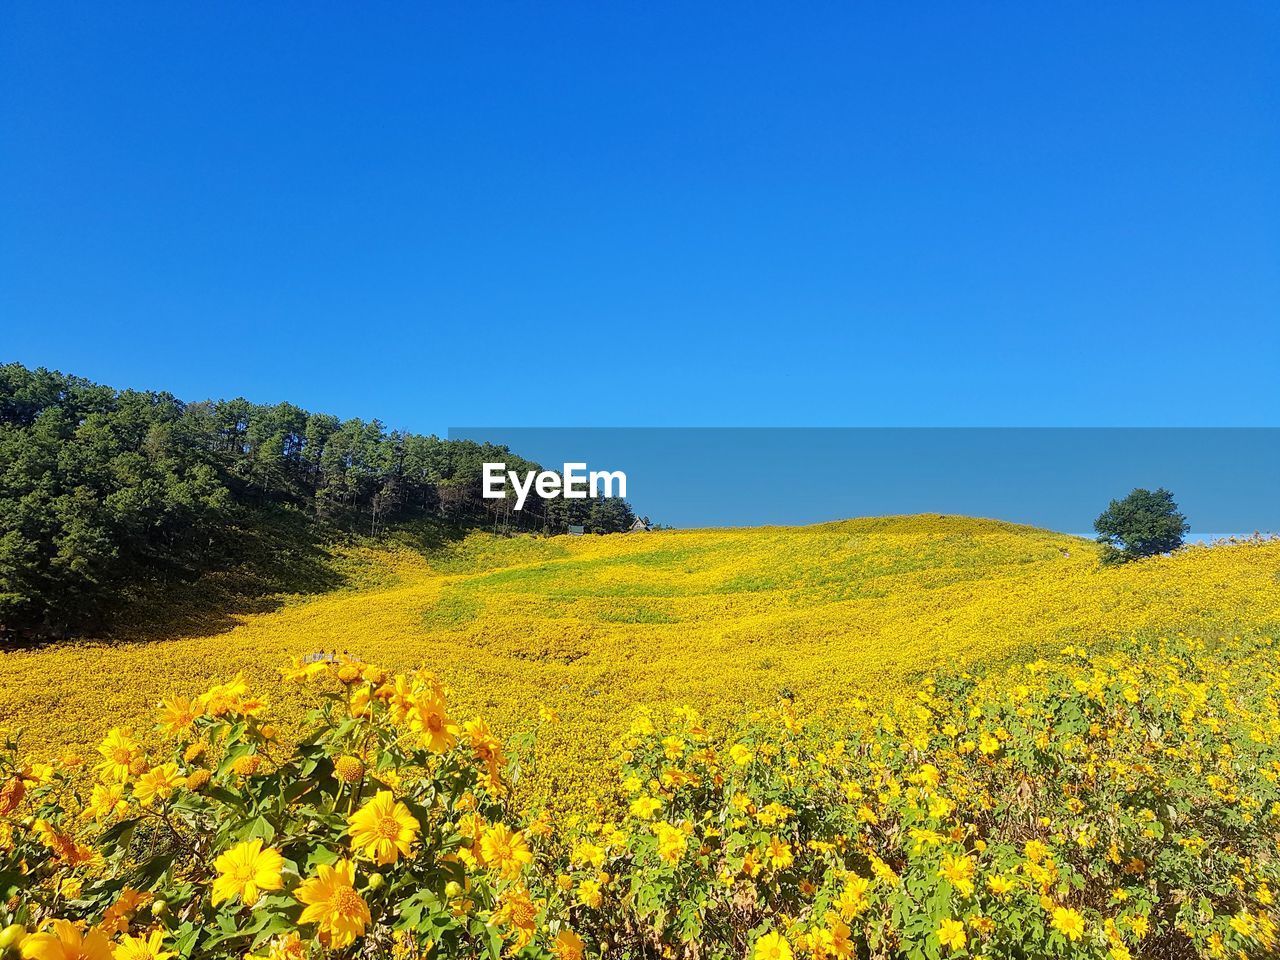 YELLOW FLOWERING PLANTS ON FIELD AGAINST CLEAR SKY